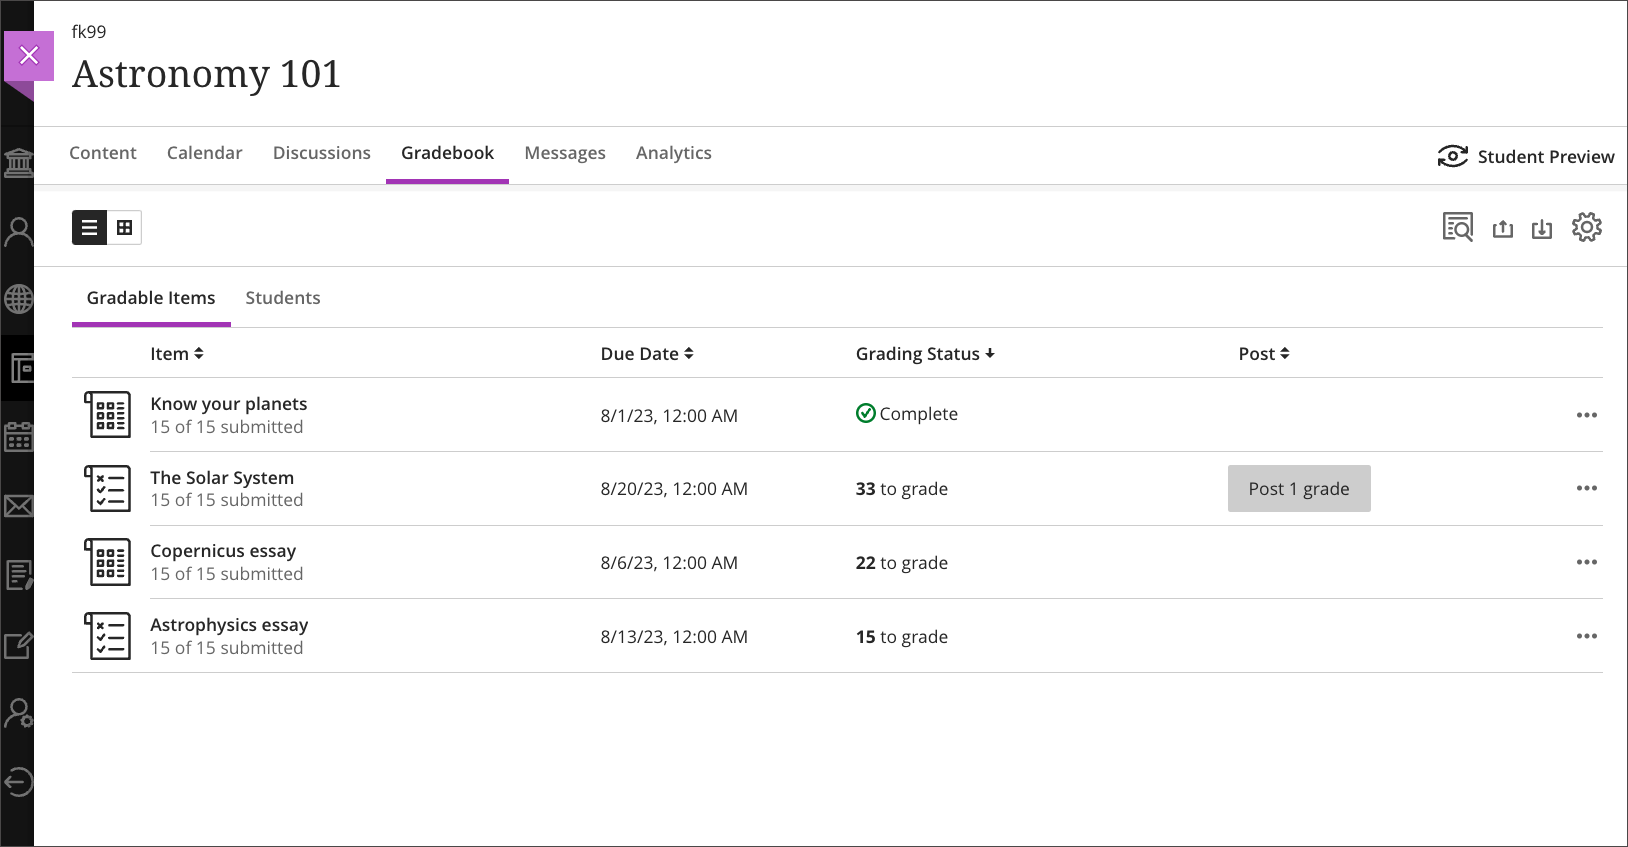 Instructor view – Sorting by Grading Status